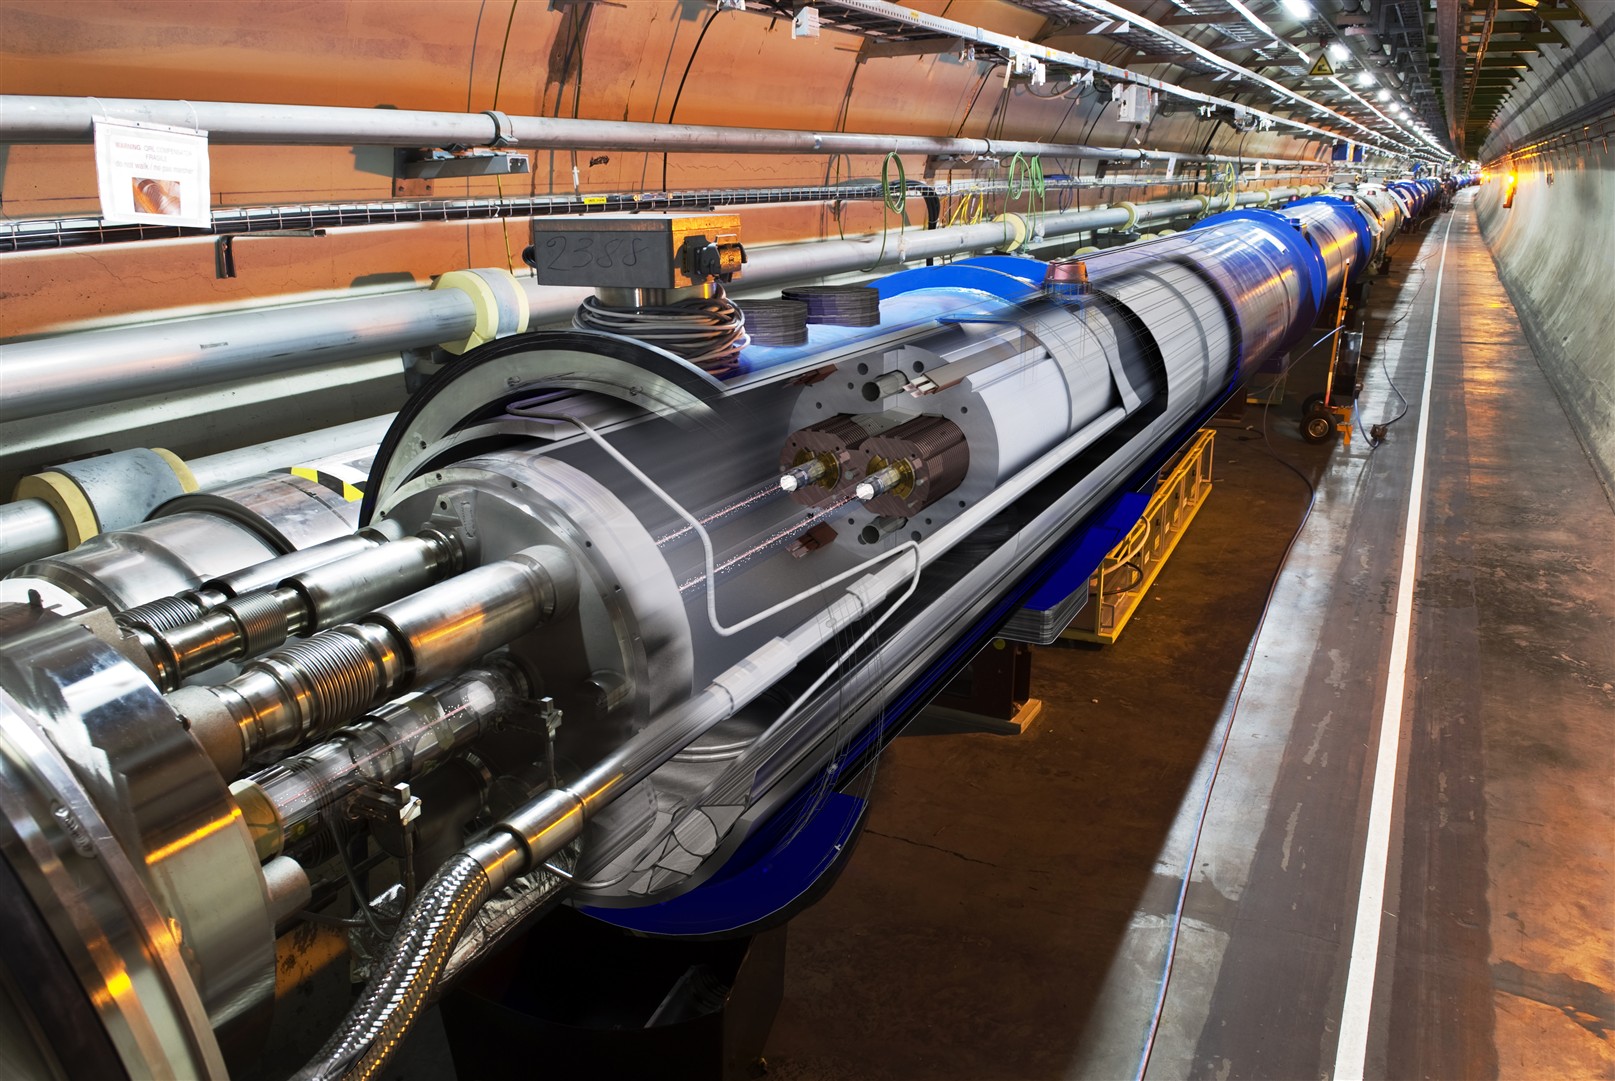 Section of the Large Hadron Collider